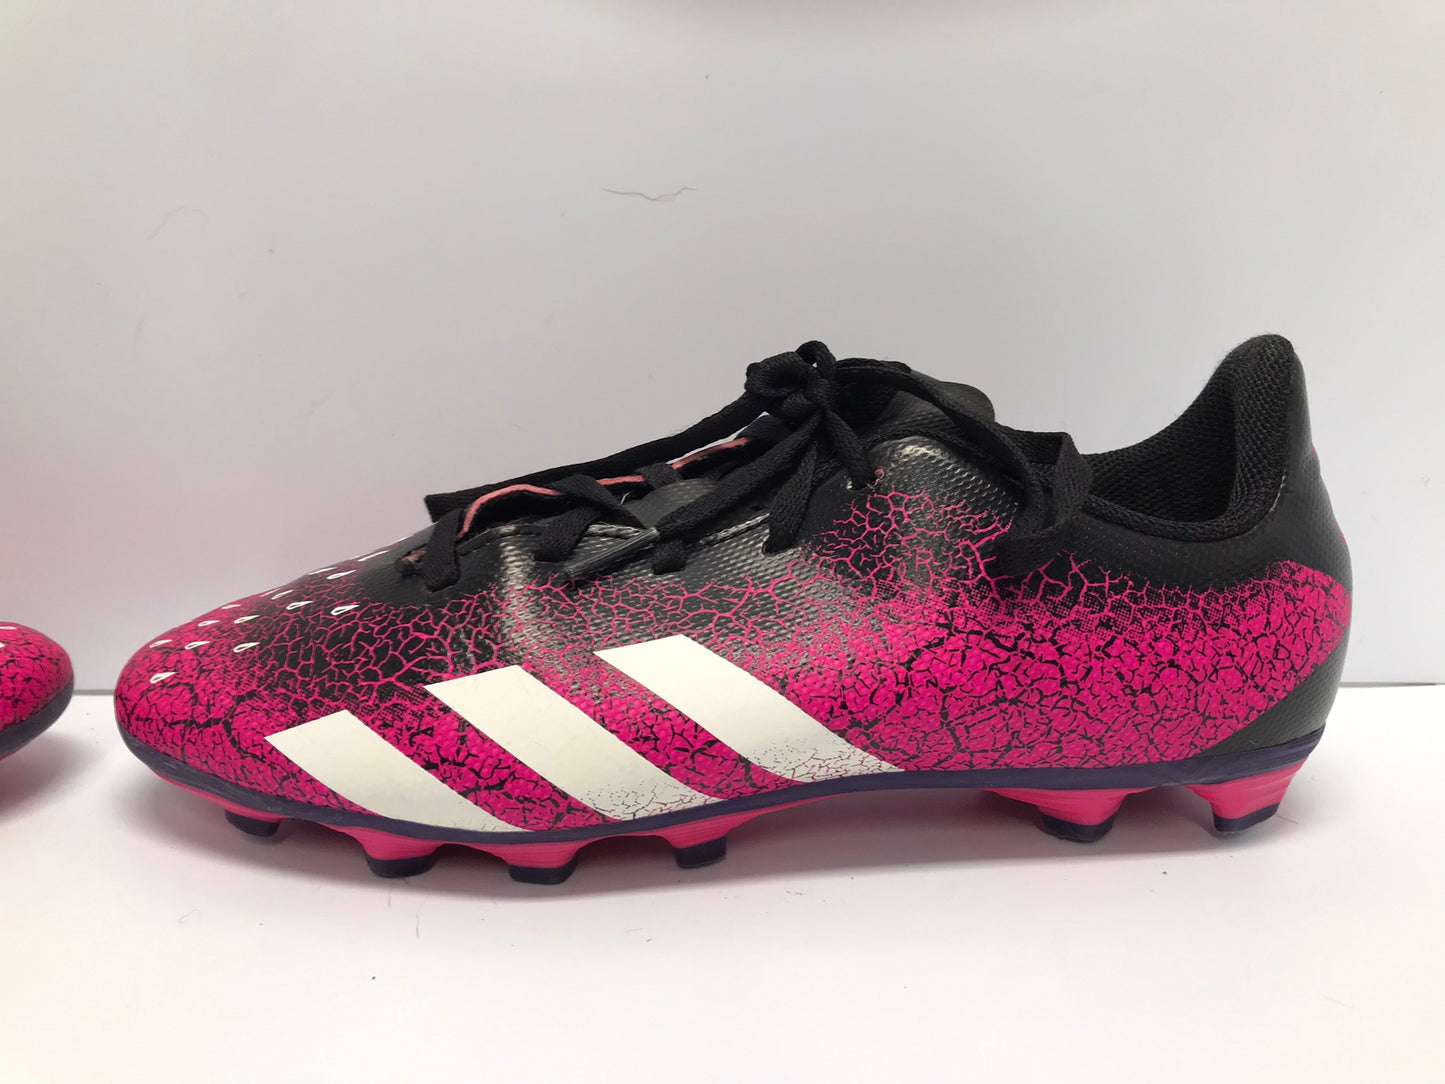 Soccer Shoes Cleats Men's Size 6 Adidas Preditor Pink Black Excellent